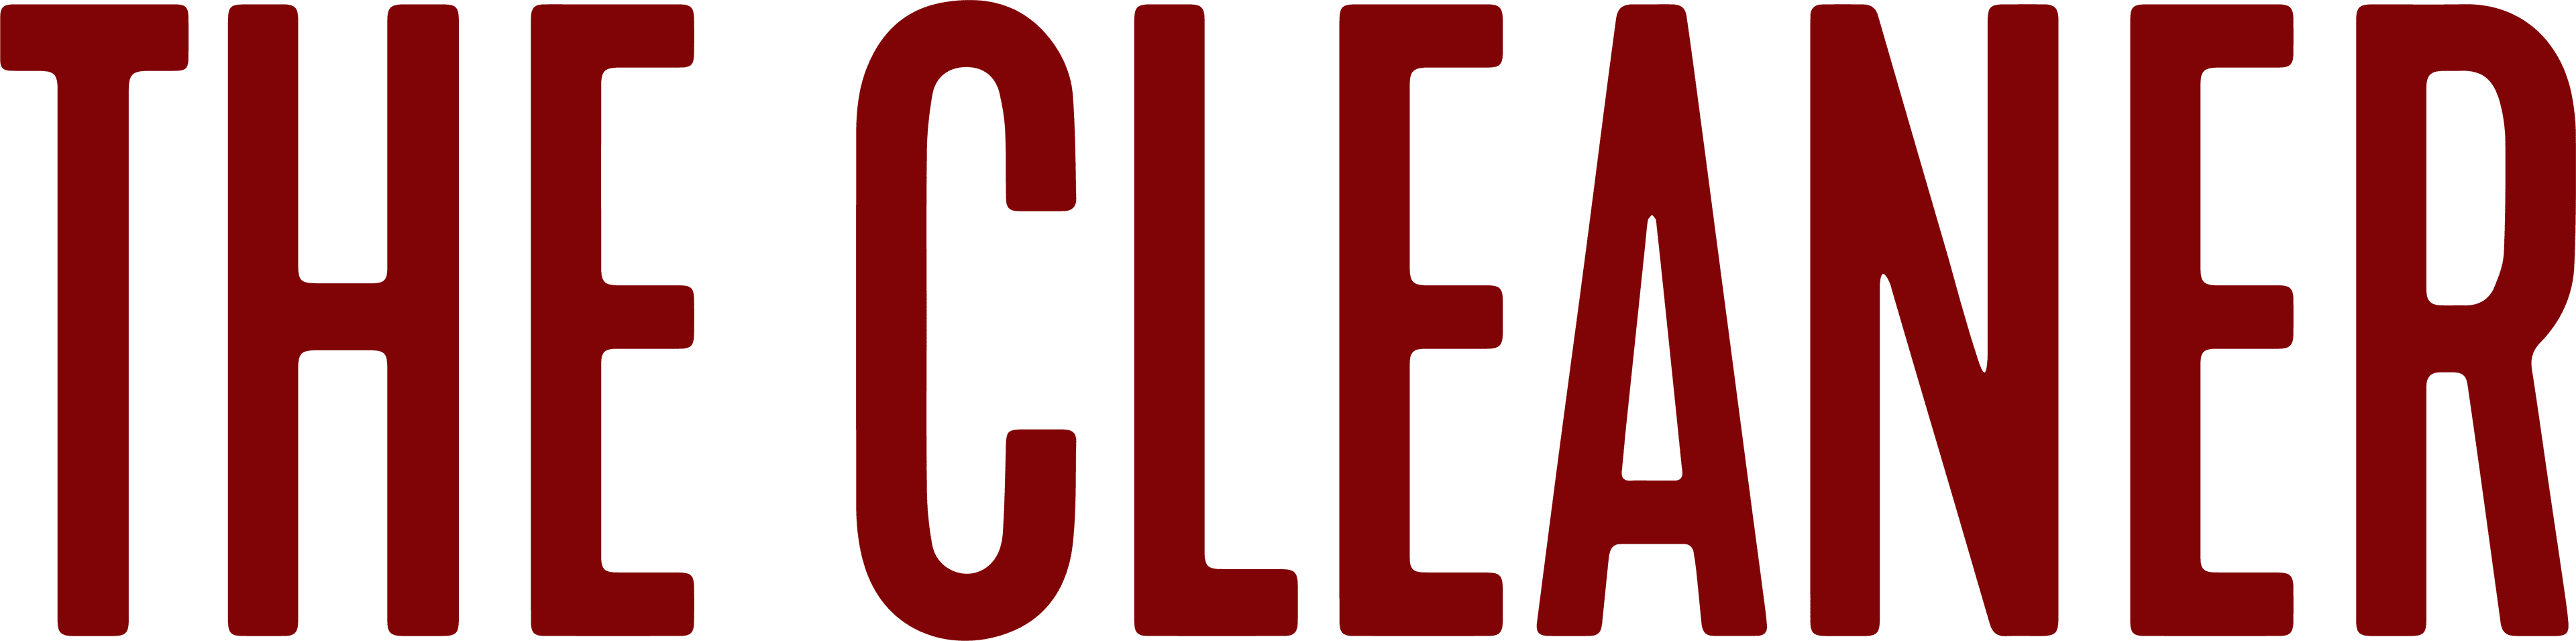 The Cleaner logo